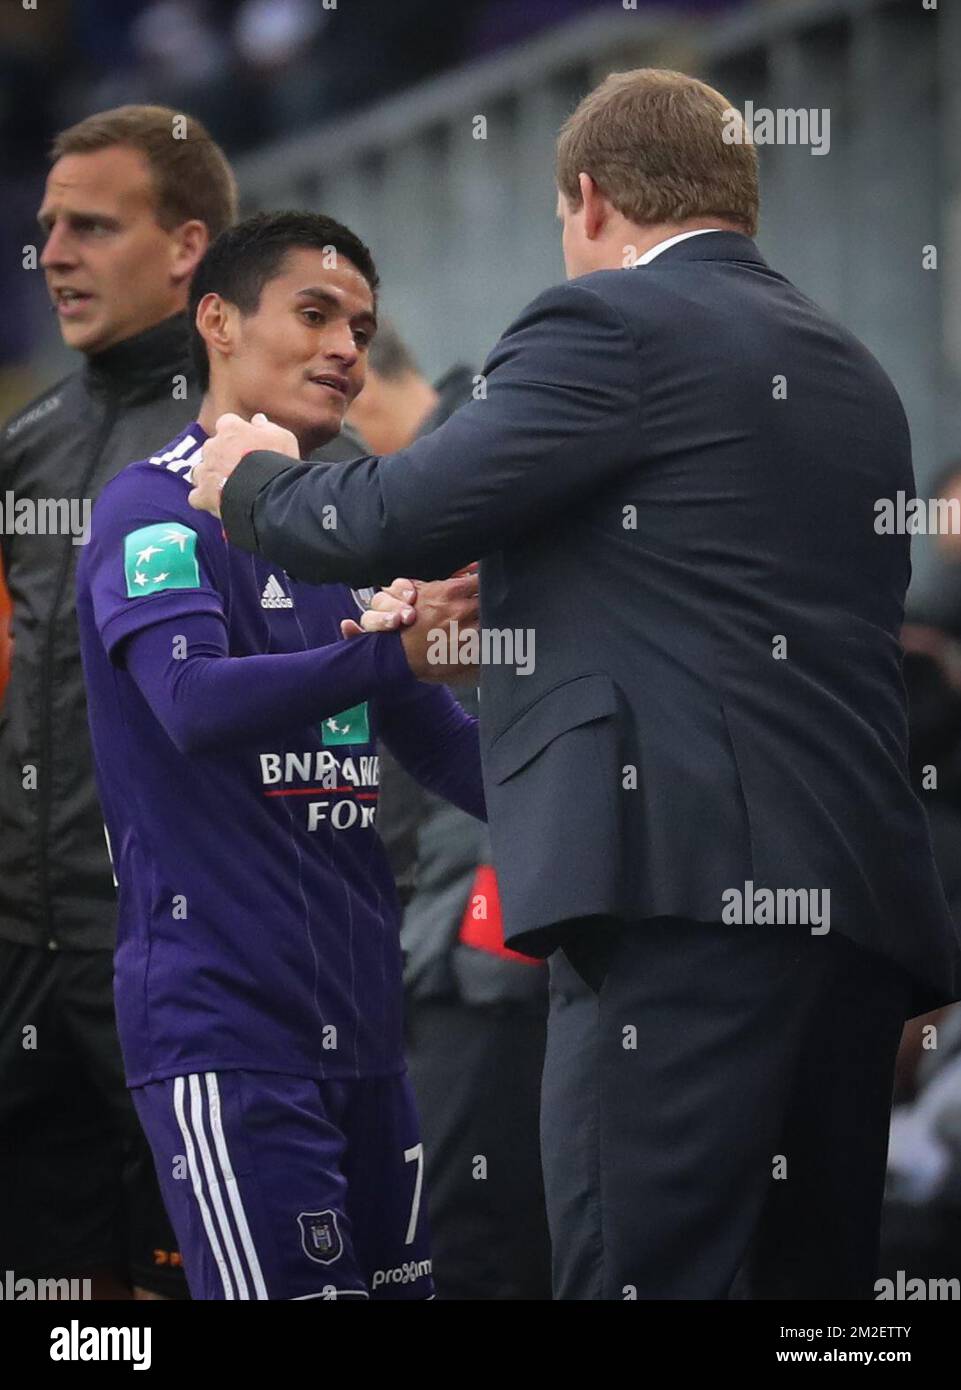 Anderlecht's Andy Najar and Anderlecht's head coach Hein Vanhaezebrouck pictured during the Jupiler Pro League match between RSC Anderlecht and Sporting Charleroi, in Brussels, Sunday 29 April 2018, on day six of the Play-Off 1 of the Belgian soccer championship. BELGA PHOTO VIRGINIE LEFOUR Stock Photo